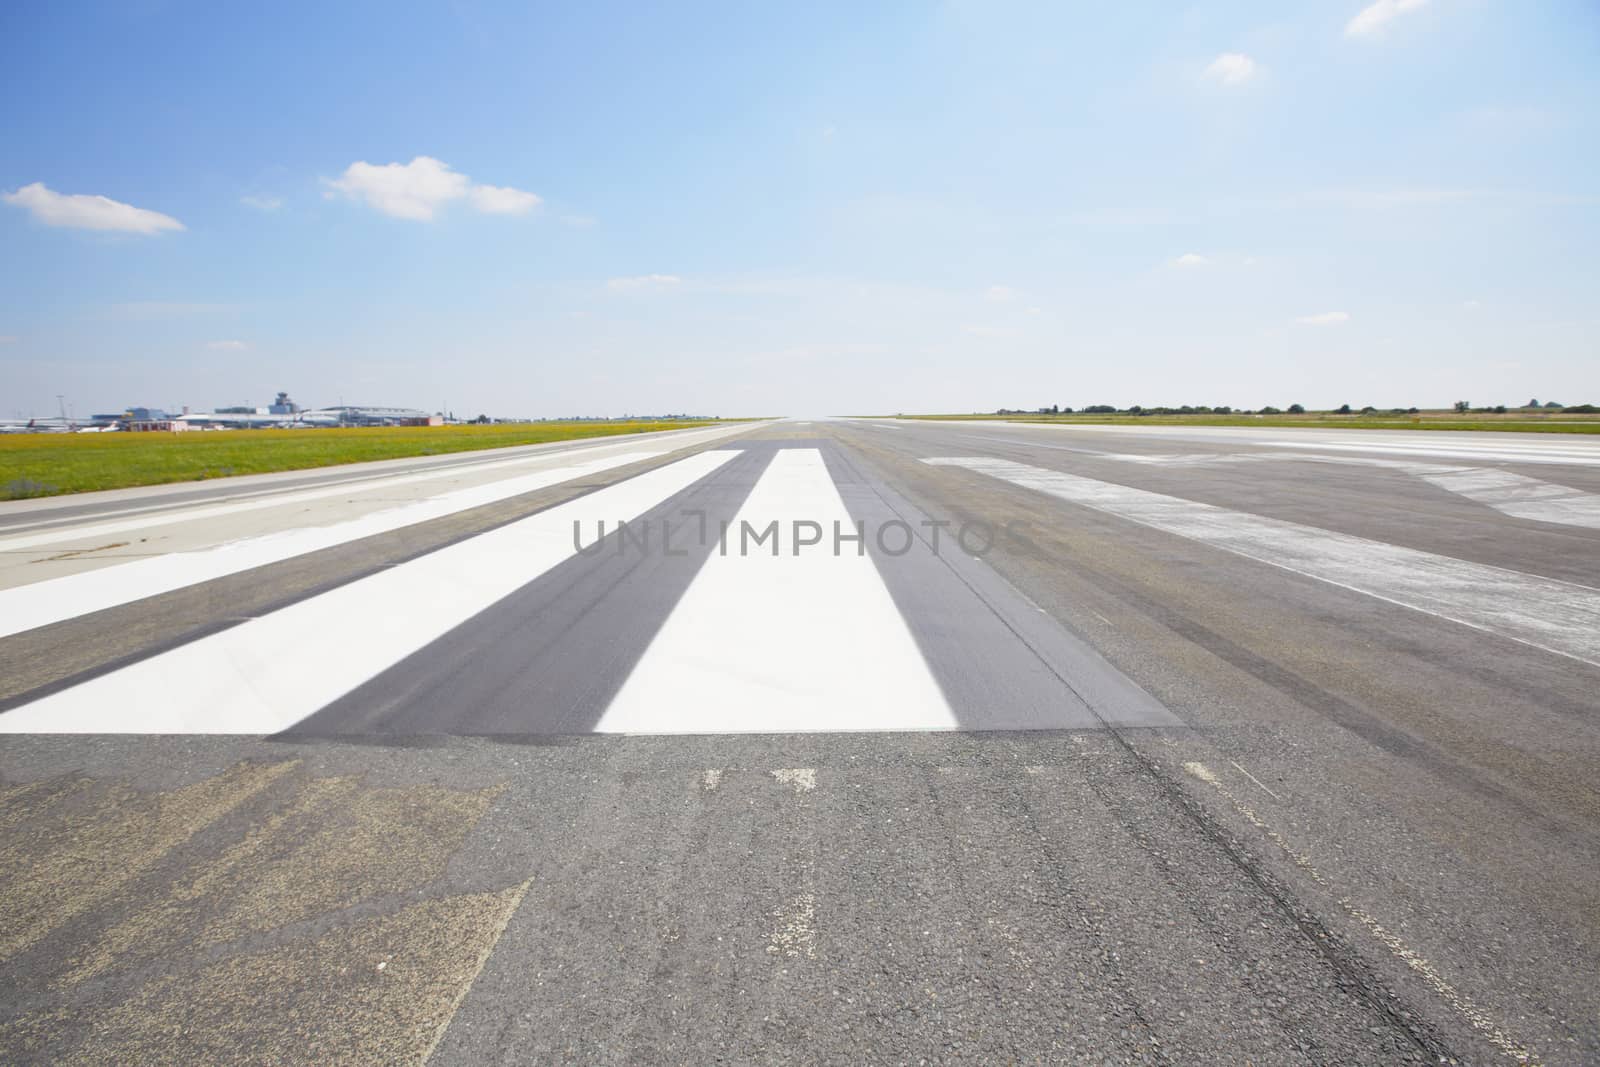 Marking on the beginning of the runway - selective focus